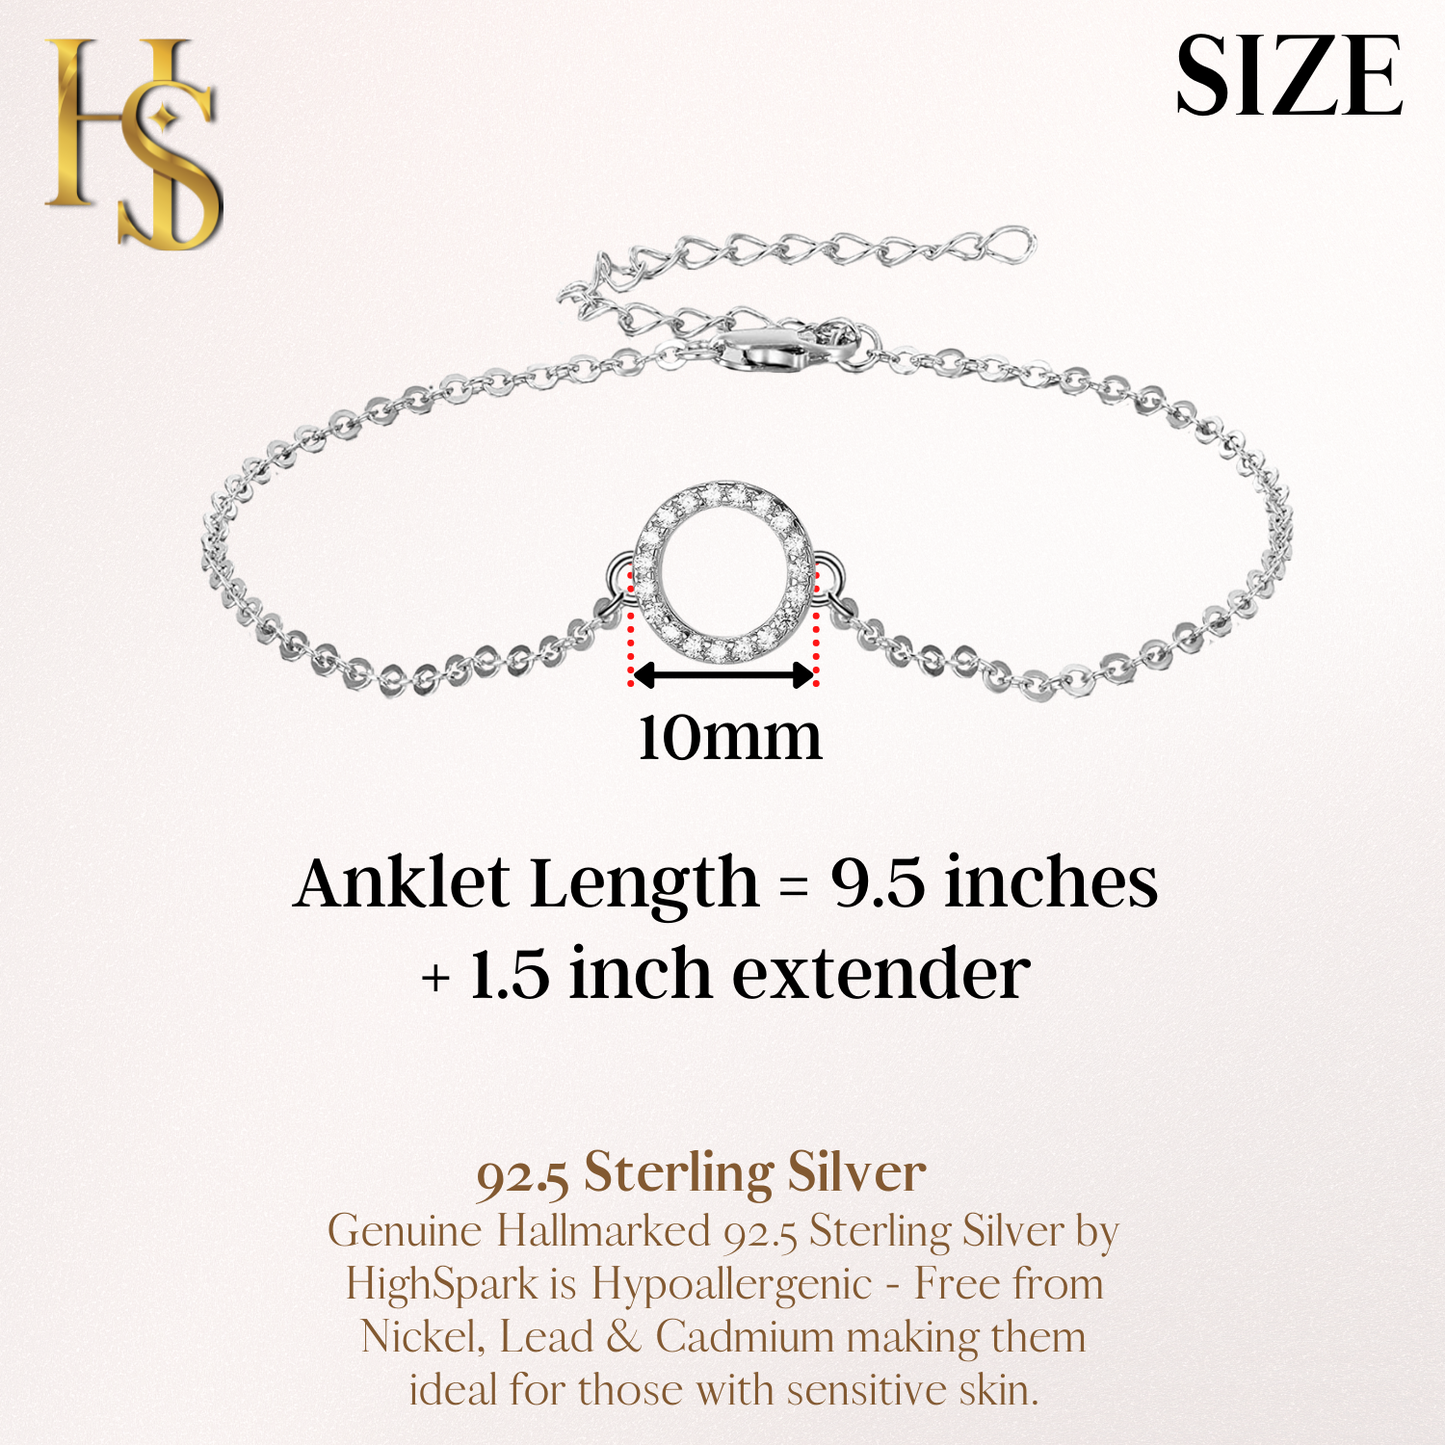 Silver Anklet - Circle of Life Celebrity Anklet - Unity, Wholeness and Completeness